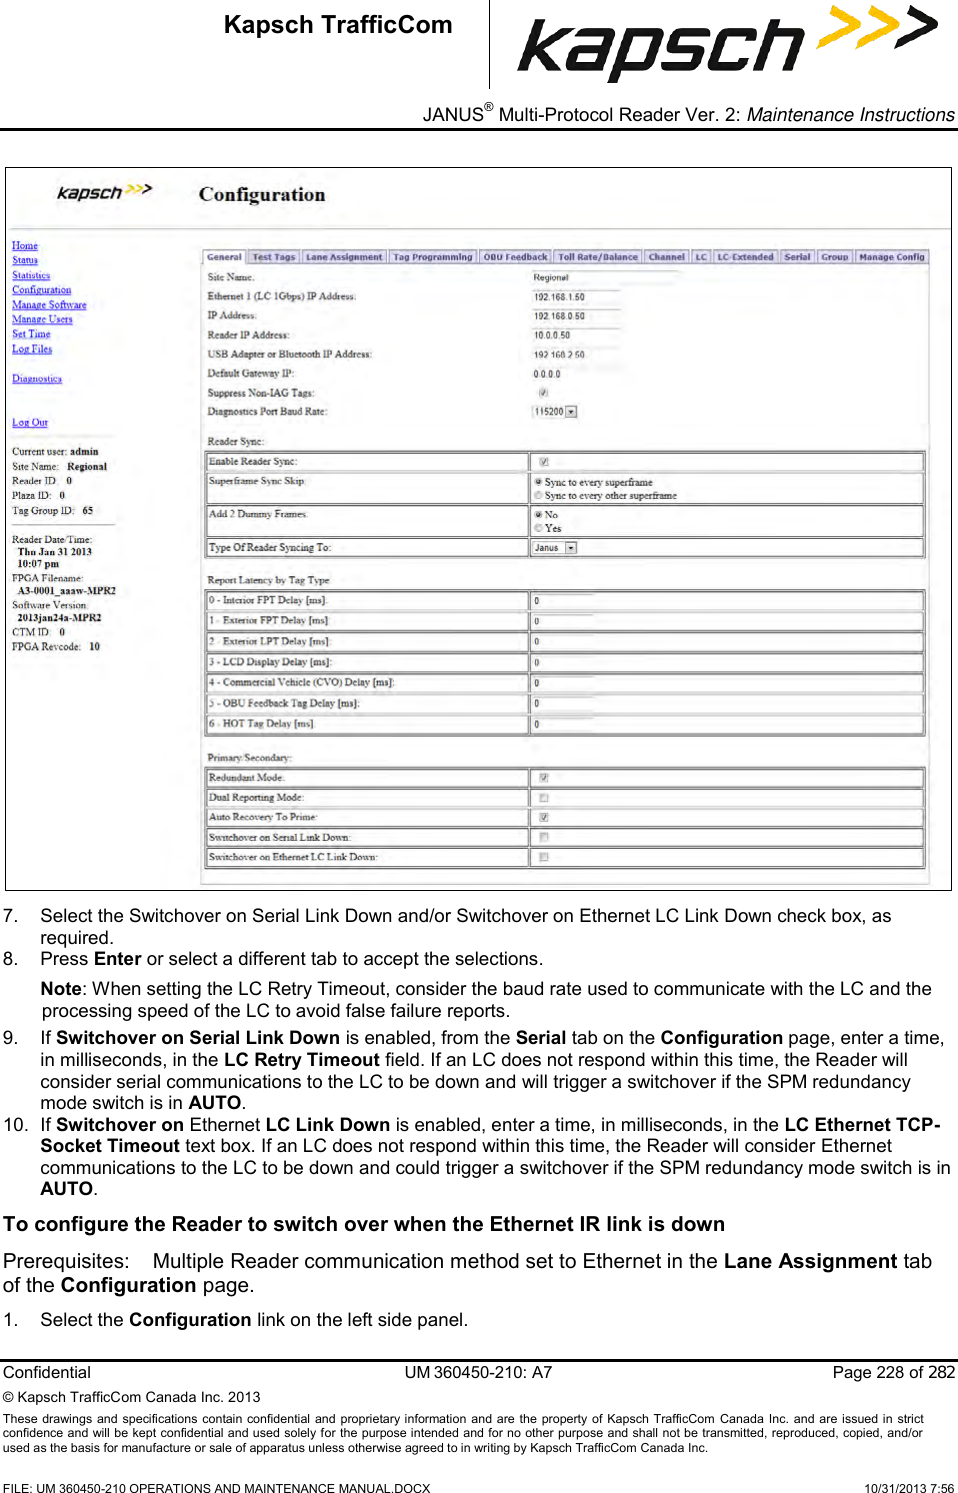 _ JANUS® Multi-Protocol Reader Ver. 2: Maintenance Instructions   Confidential  UM 360450-210: A7  Page 228 of 282 © Kapsch TrafficCom Canada Inc. 2013 These  drawings and specifications contain confidential  and  proprietary information and are  the  property of Kapsch TrafficCom  Canada Inc.  and are issued in strict confidence and will be kept confidential and used solely for the purpose intended and for no other purpose and shall not be transmitted, reproduced, copied, and/or used as the basis for manufacture or sale of apparatus unless otherwise agreed to in writing by Kapsch TrafficCom Canada Inc.    FILE: UM 360450-210 OPERATIONS AND MAINTENANCE MANUAL.DOCX    10/31/2013 7:56 Kapsch TrafficCom  7.  Select the Switchover on Serial Link Down and/or Switchover on Ethernet LC Link Down check box, as required.  8.  Press Enter or select a different tab to accept the selections. Note: When setting the LC Retry Timeout, consider the baud rate used to communicate with the LC and the processing speed of the LC to avoid false failure reports.  9. If Switchover on Serial Link Down is enabled, from the Serial tab on the Configuration page, enter a time, in milliseconds, in the LC Retry Timeout field. If an LC does not respond within this time, the Reader will consider serial communications to the LC to be down and will trigger a switchover if the SPM redundancy mode switch is in AUTO. 10. If Switchover on Ethernet LC Link Down is enabled, enter a time, in milliseconds, in the LC Ethernet TCP-Socket Timeout text box. If an LC does not respond within this time, the Reader will consider Ethernet communications to the LC to be down and could trigger a switchover if the SPM redundancy mode switch is in AUTO. To configure the Reader to switch over when the Ethernet IR link is down Prerequisites:  Multiple Reader communication method set to Ethernet in the Lane Assignment tab of the Configuration page. 1.  Select the Configuration link on the left side panel. 